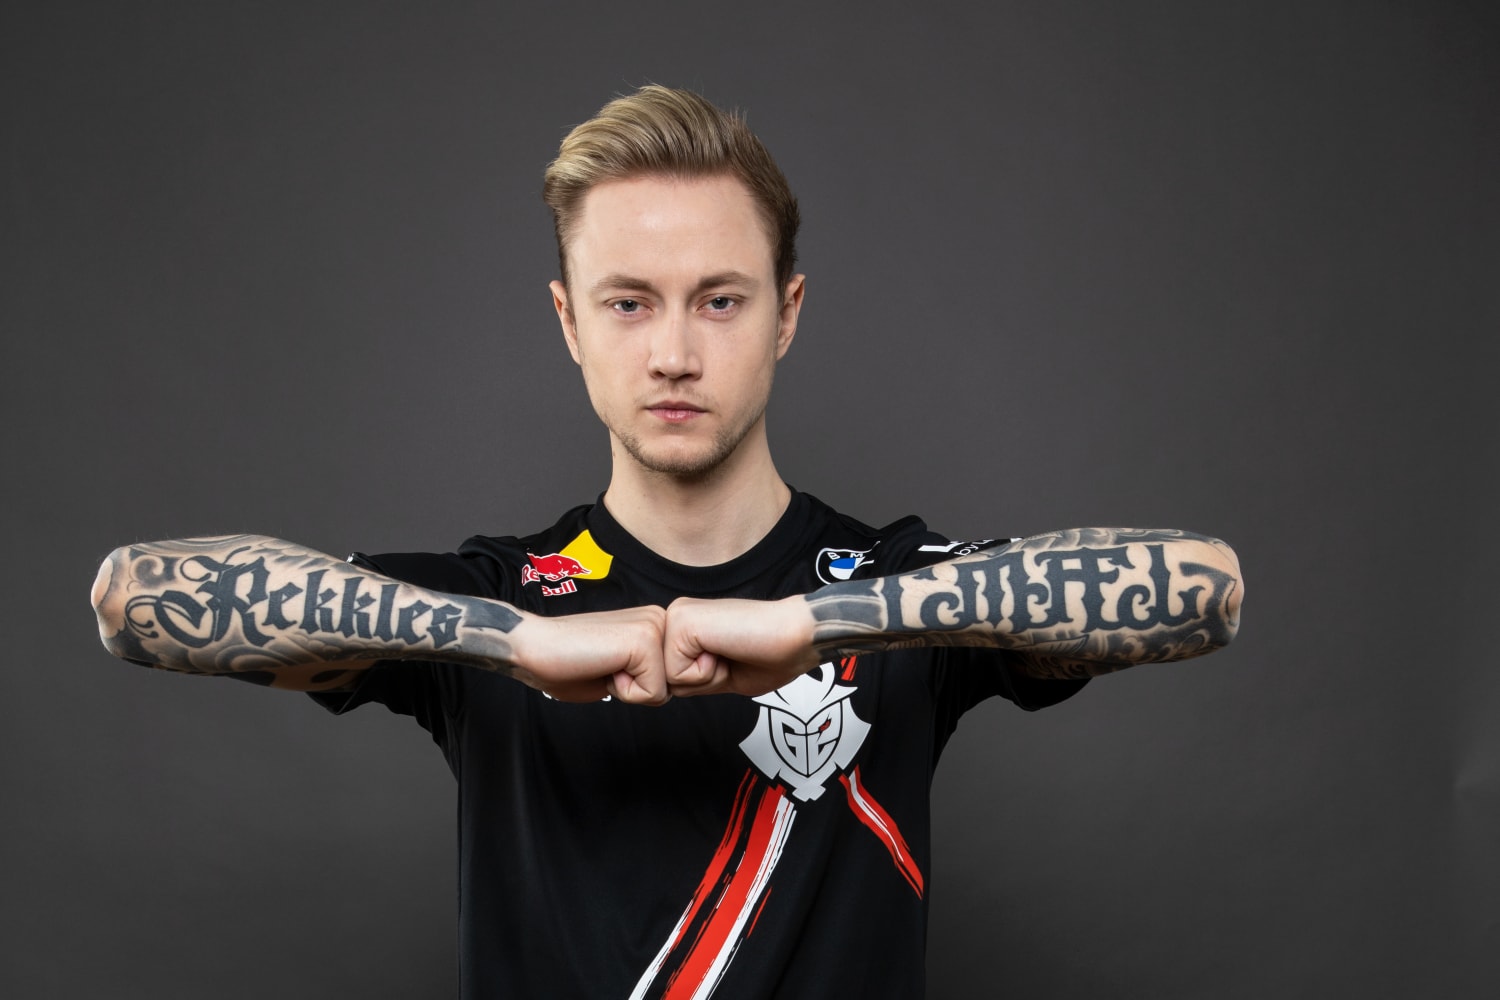 Rekkles makes an amazing start to his G2 Esports career